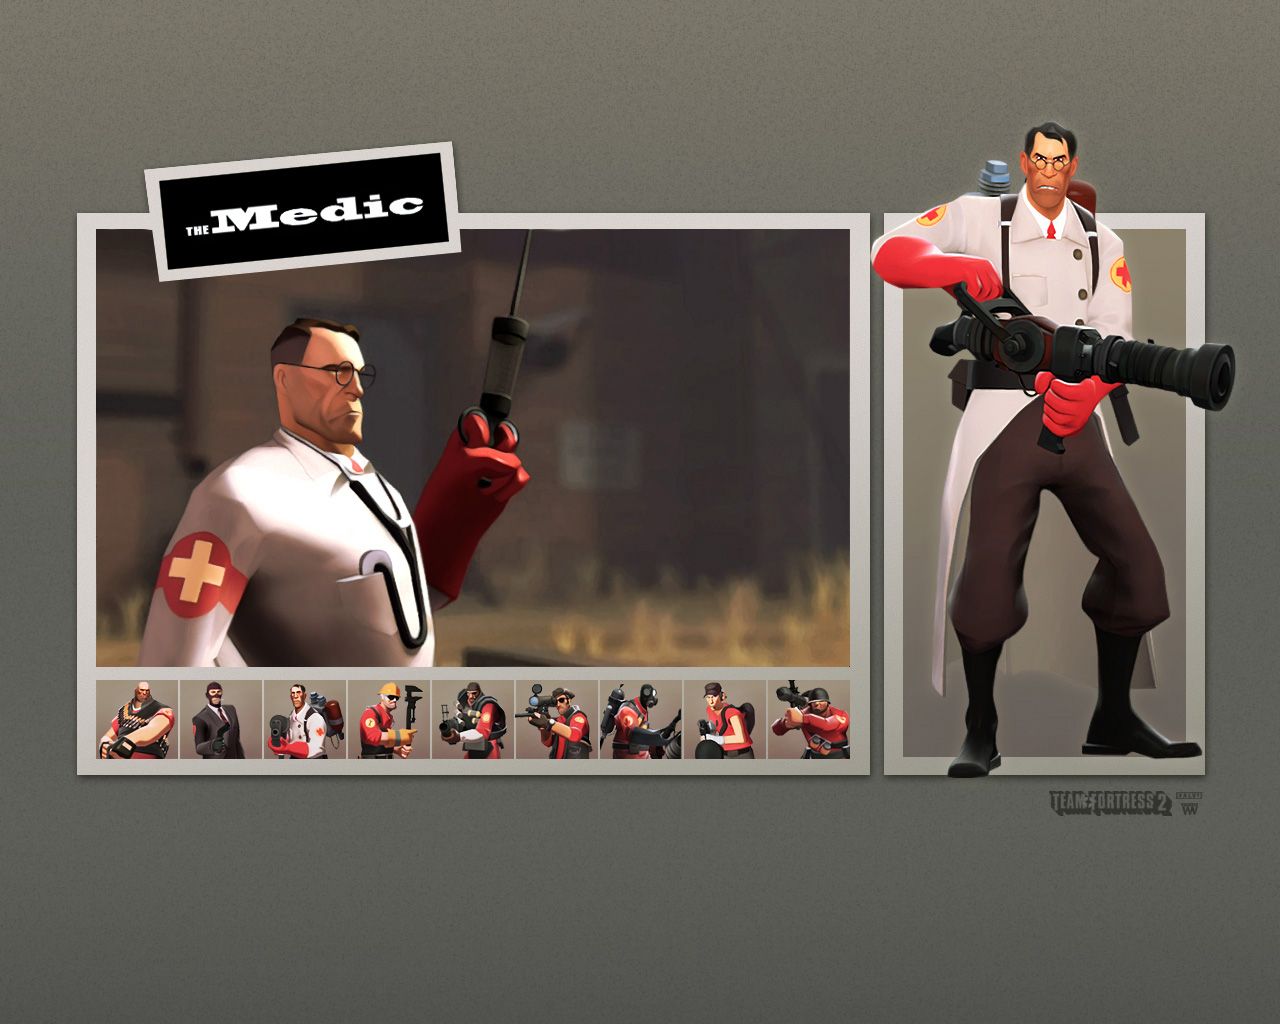 69 Team Fortress 2 HD Wallpapers | Backgrounds - Wallpaper Abyss